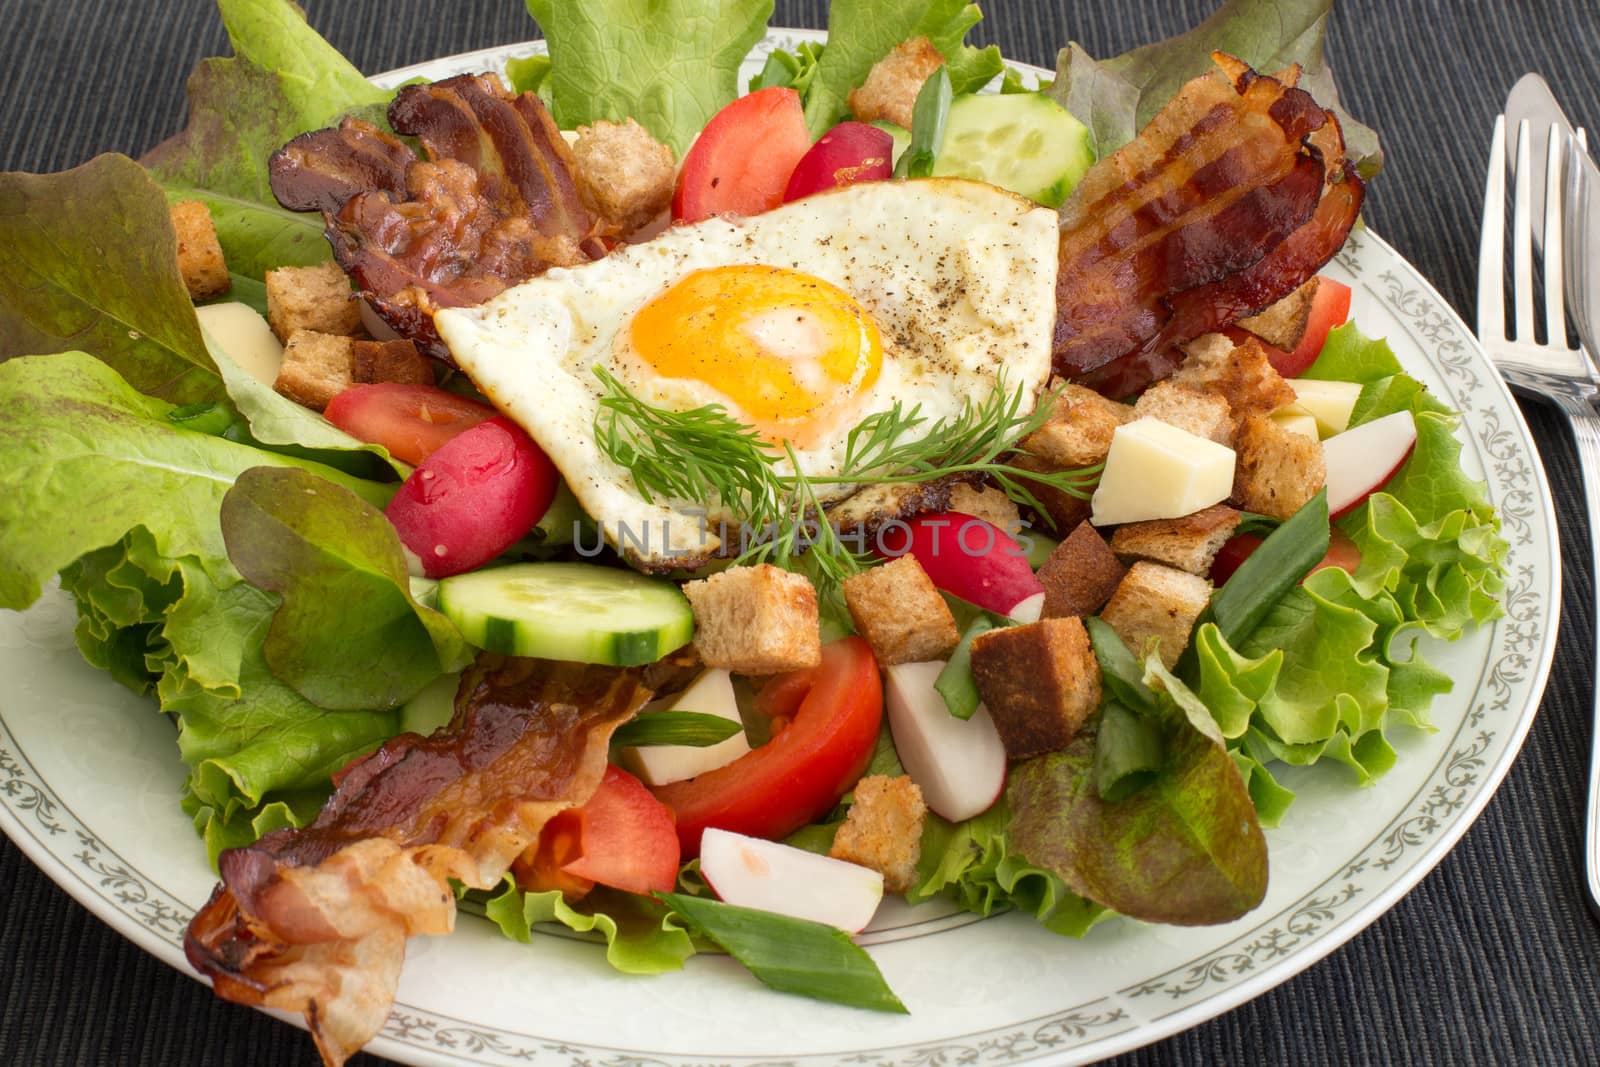 Country salad also called peasant salad, greek salad or village salad. Composed with lettuce, cucumber, onion, radish, fried egg and bacon, cheese, tomatoes, parsley and croutons.